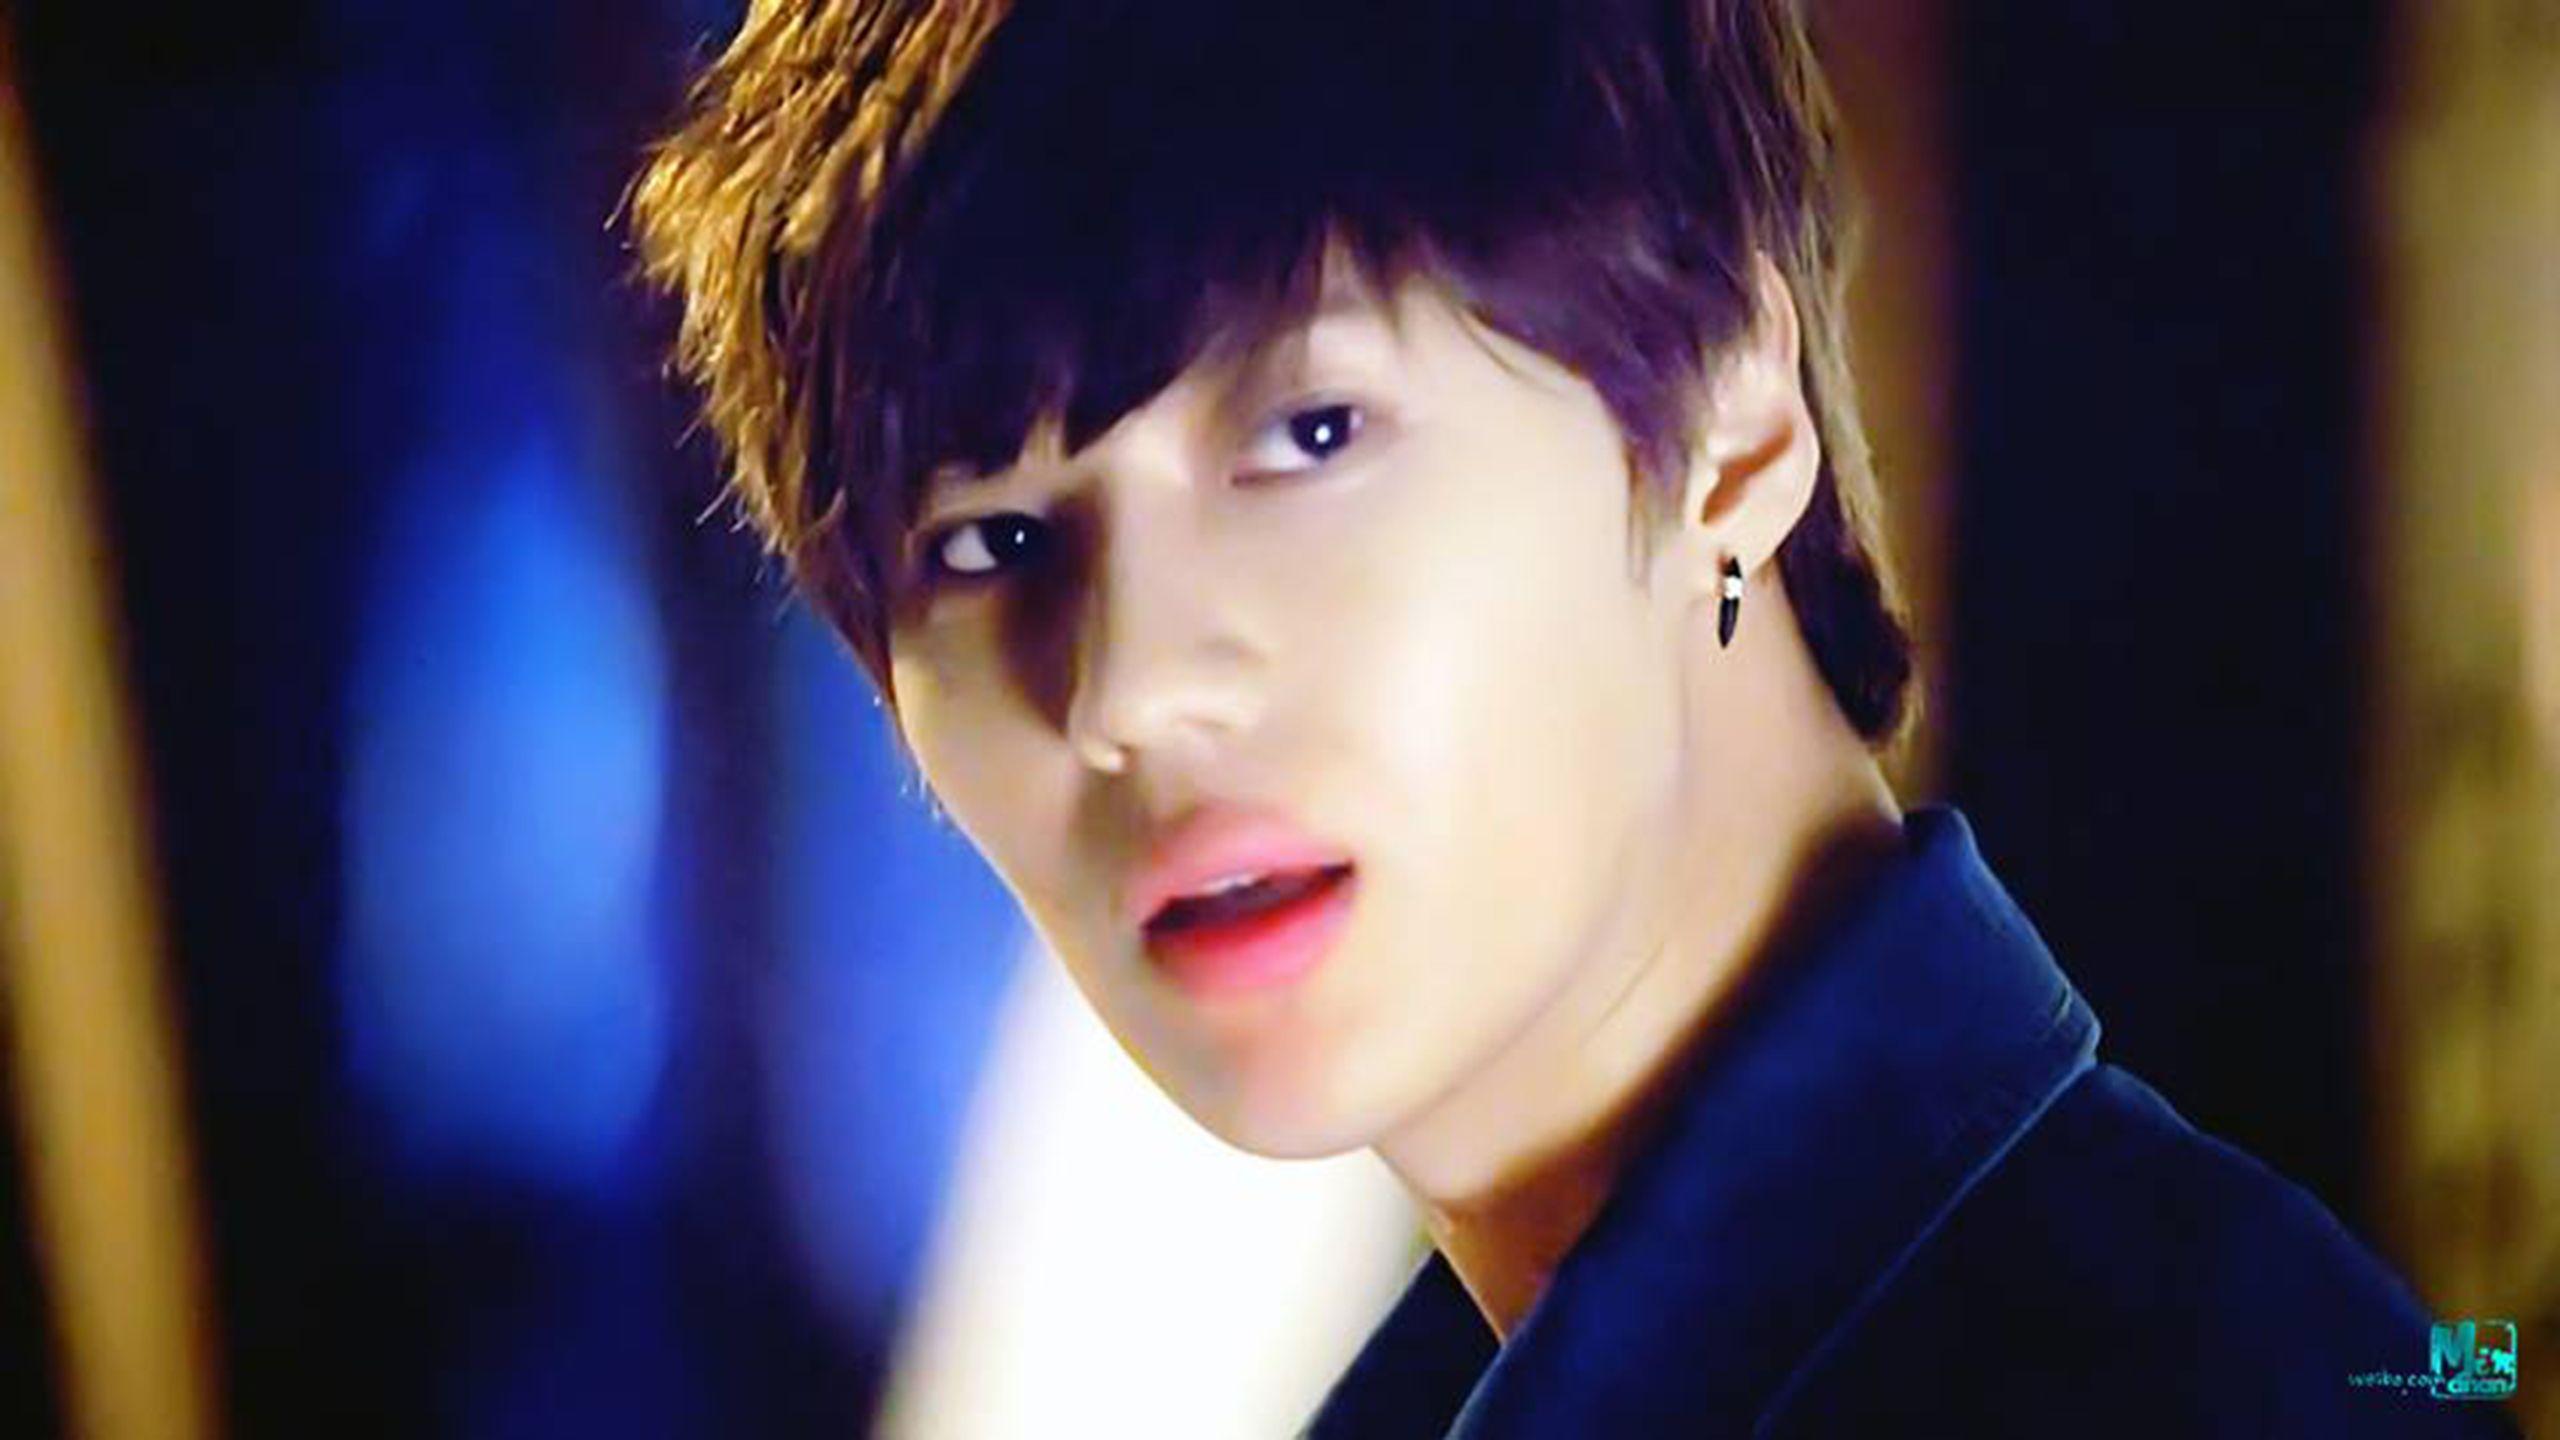 Lee Taemin Wallpaper, Image Collection of Lee Taemin. nEWY465